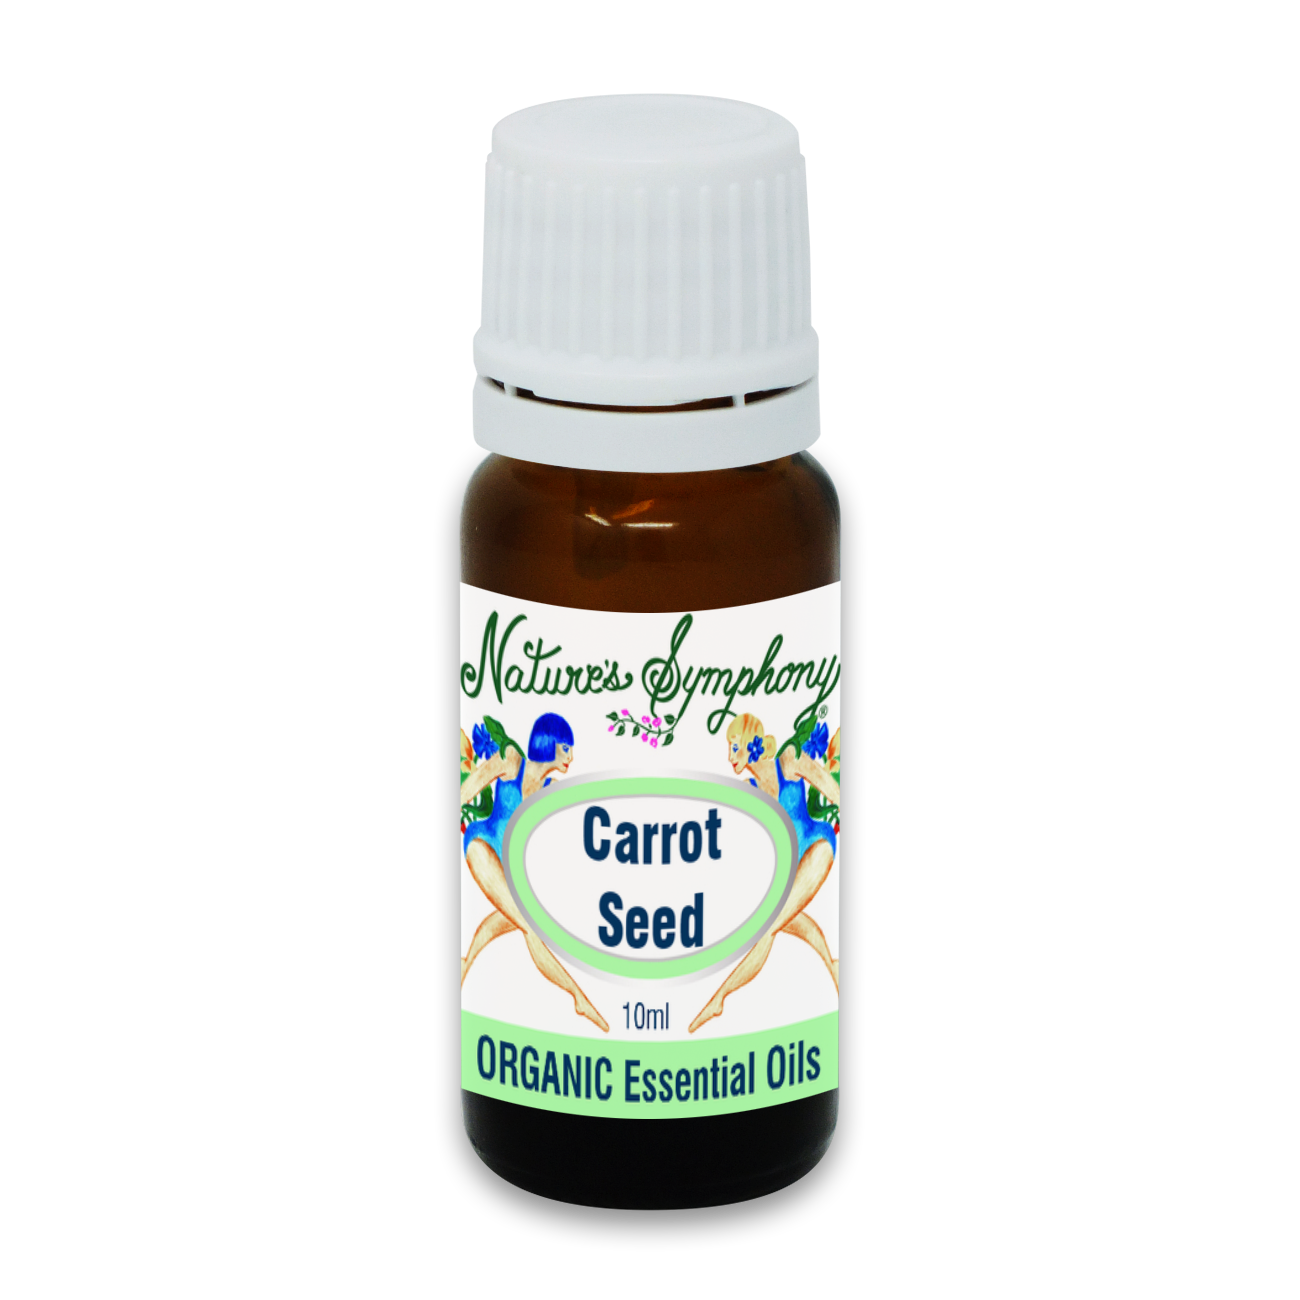 Carrot Seed, Organic/Wildcrafted oil - 10ml